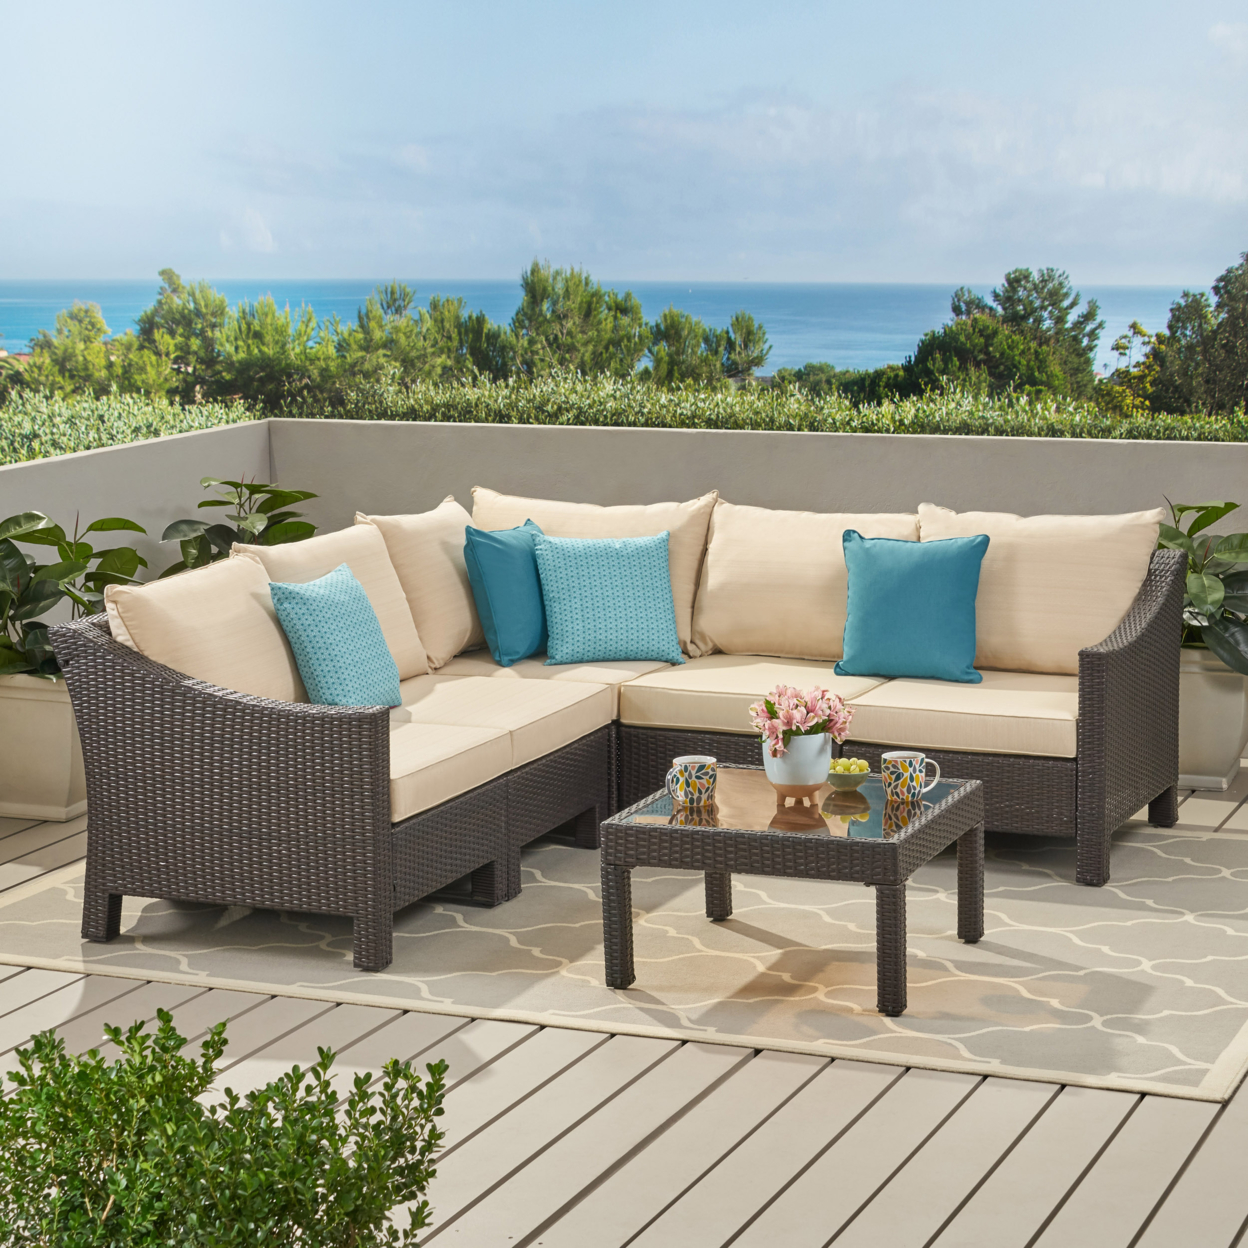 Caspian 6pc Outdoor Wicker V-shaped Sectional Sofa Set With Cushions - Multibrown / Beige